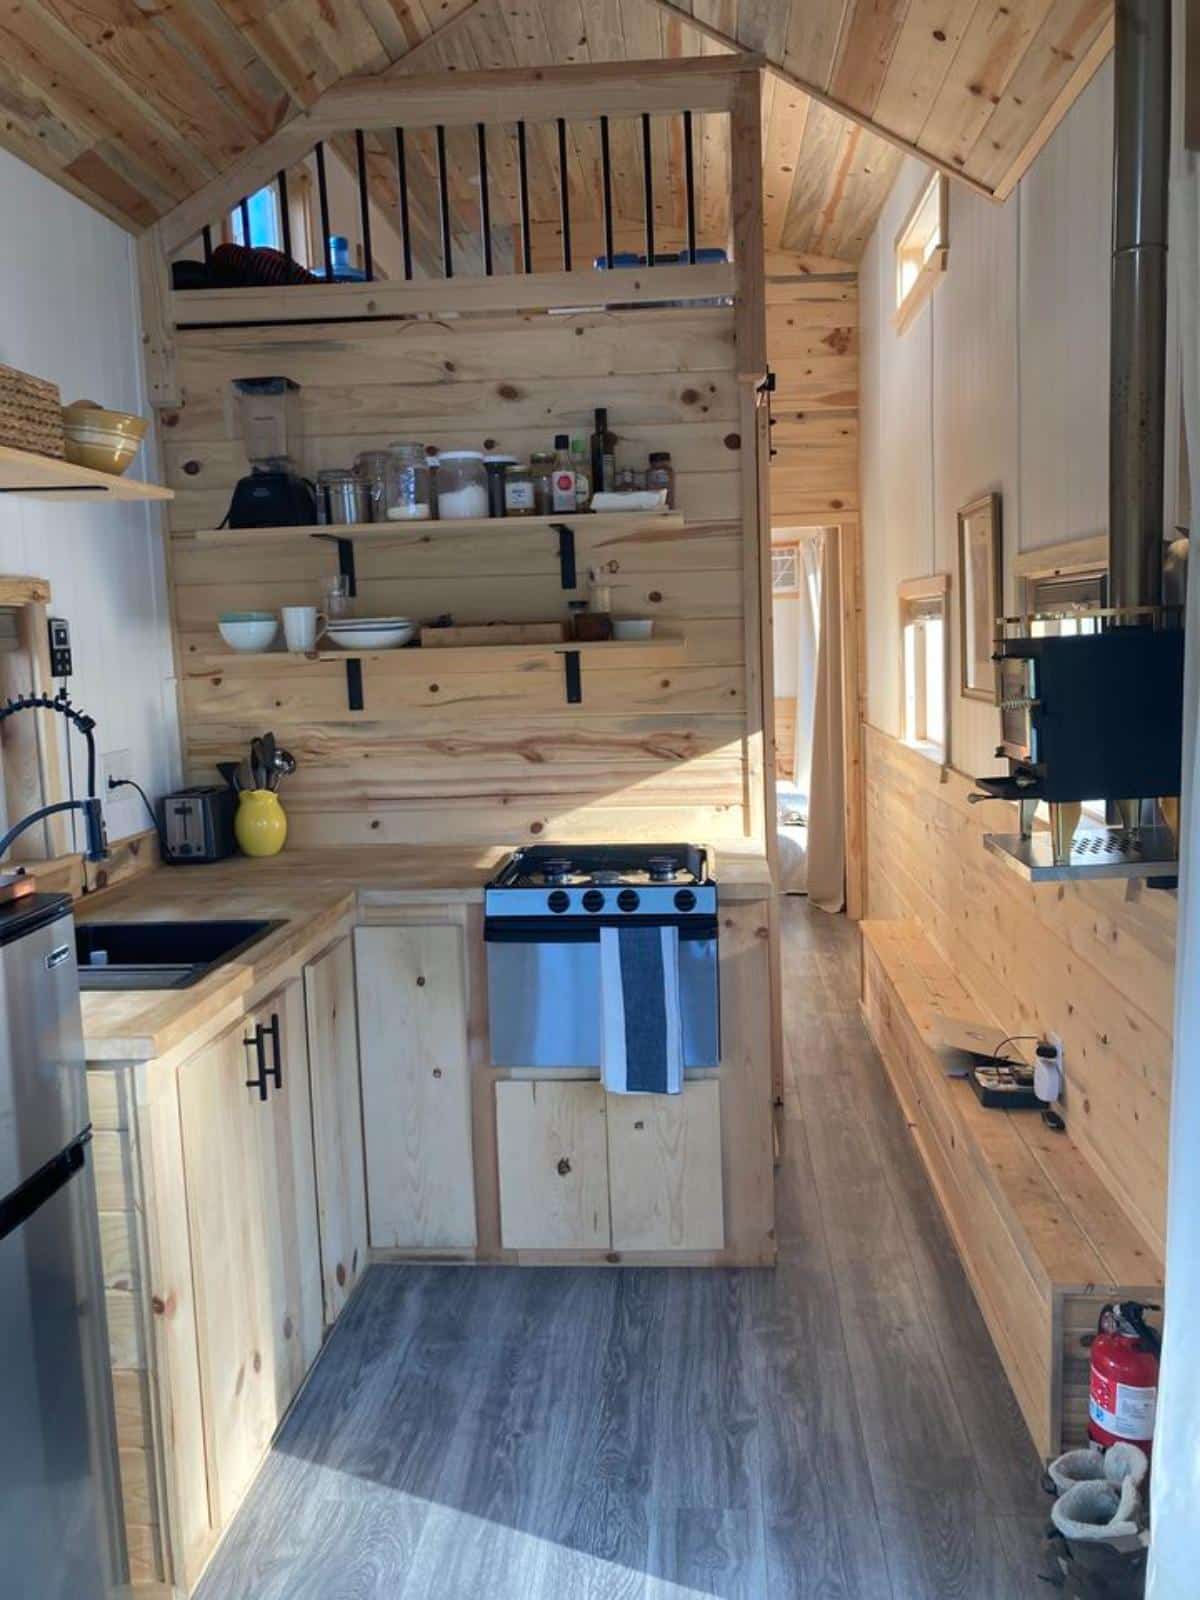 L shaped kitchen area of 32’ tiny house on wheels